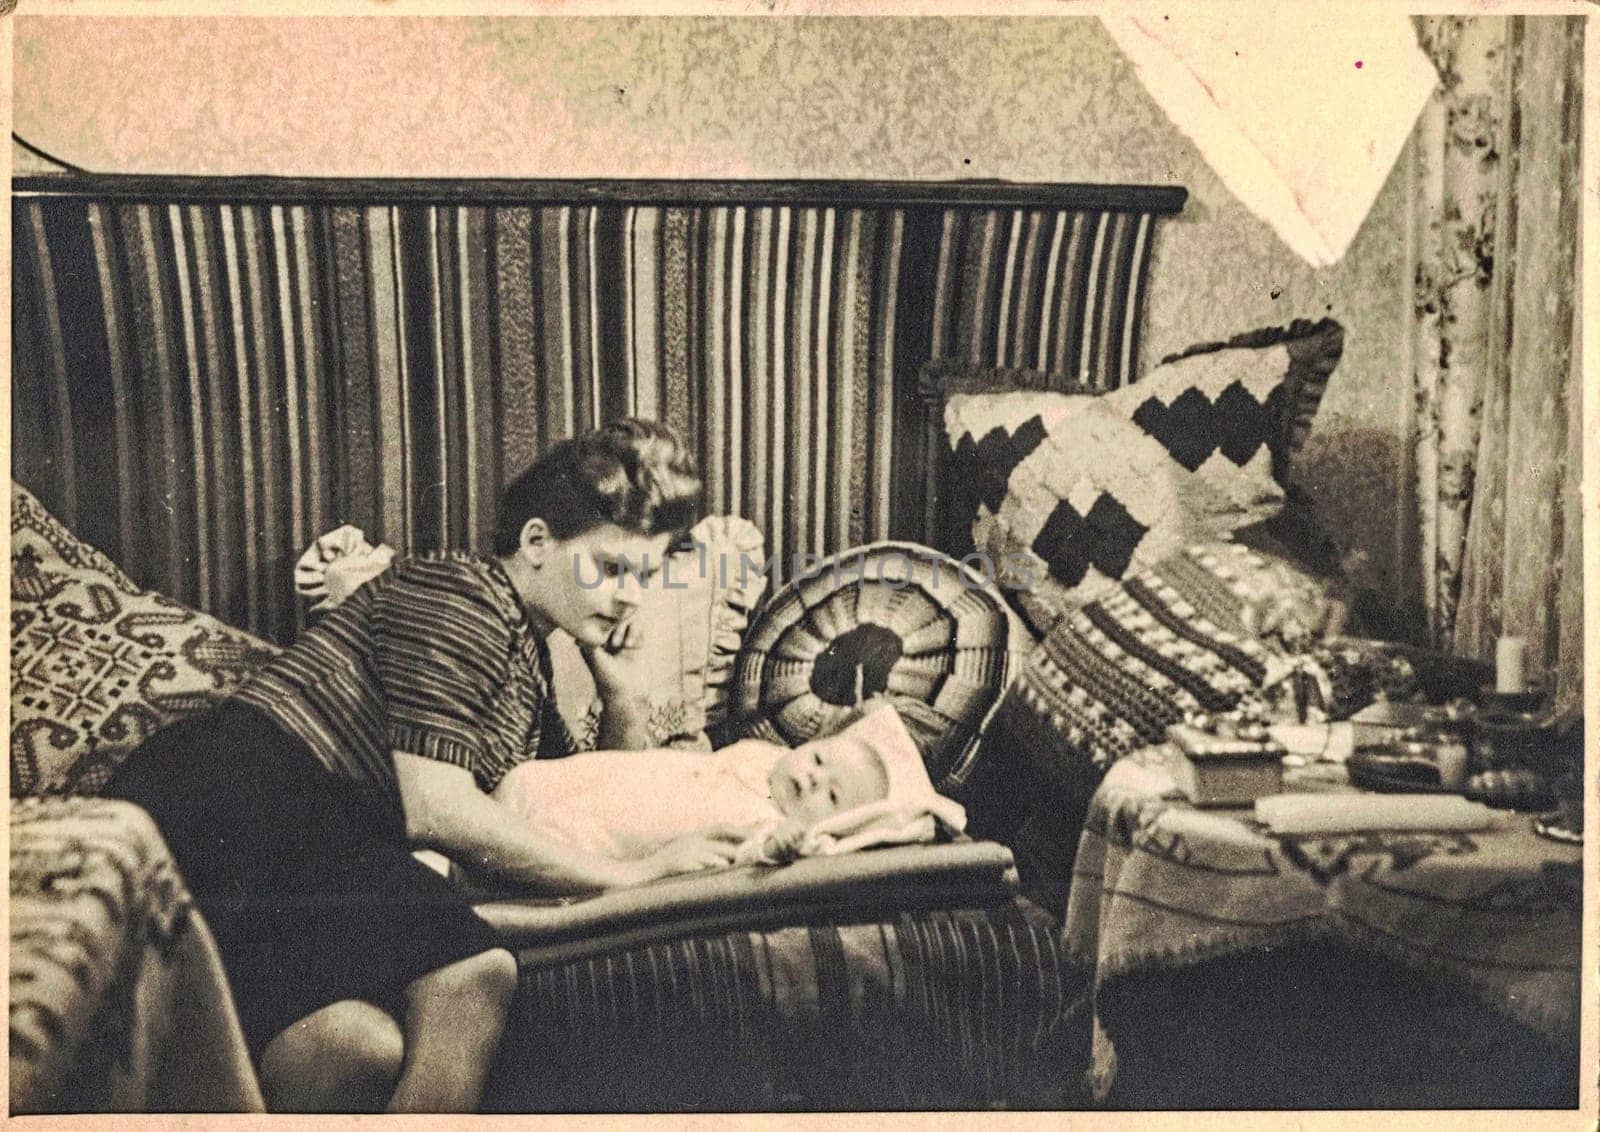 Retro photo shows happy mum with baby child. The sixties and knitted pillow in Socialist bloc. by roman_nerud